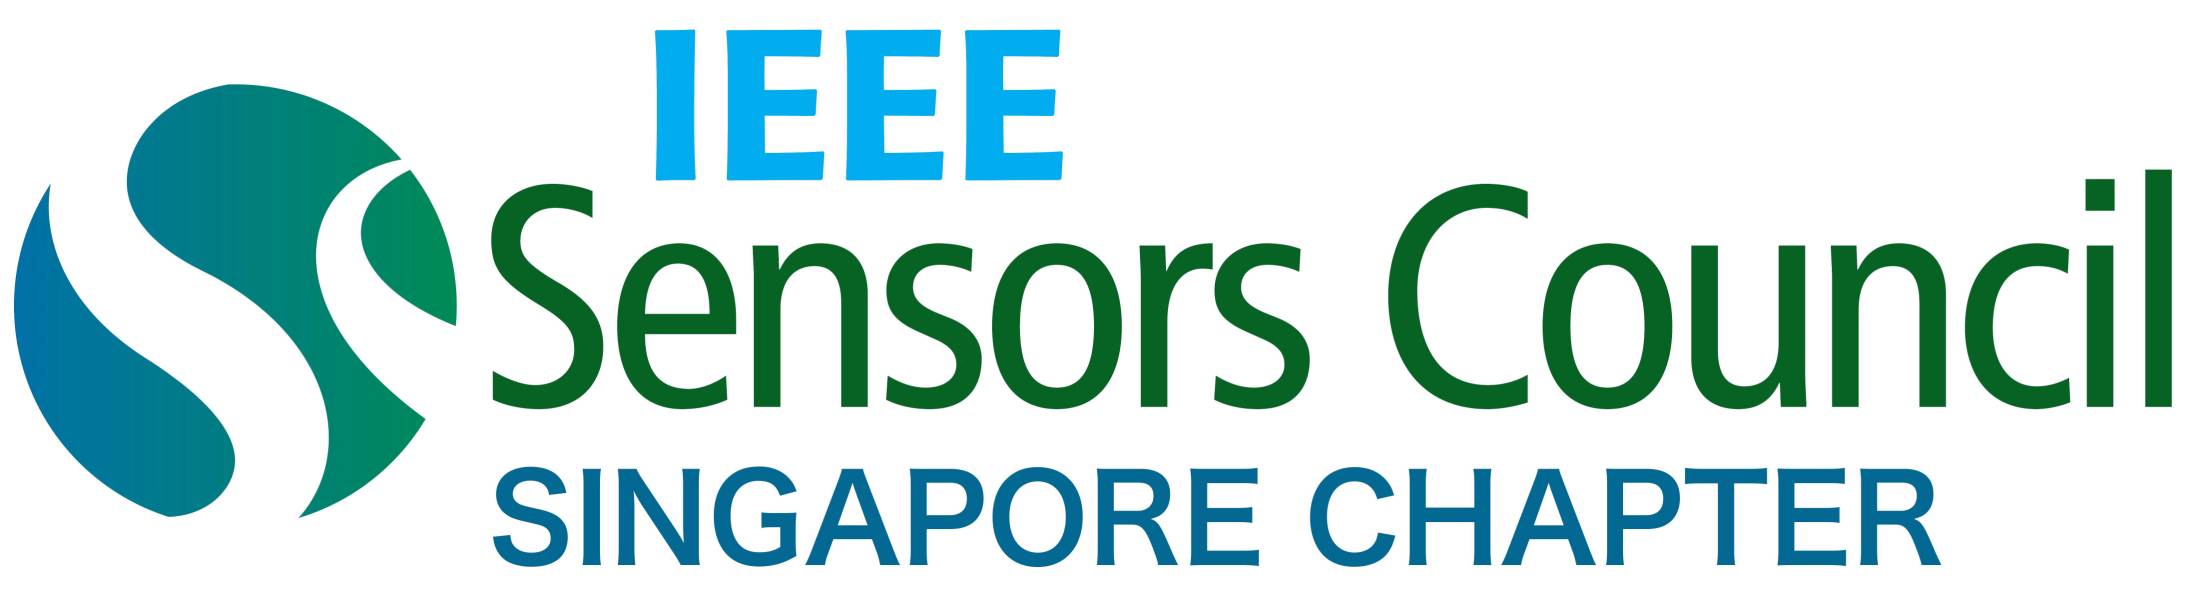 IEEE Sensors Council Singapore Chapter